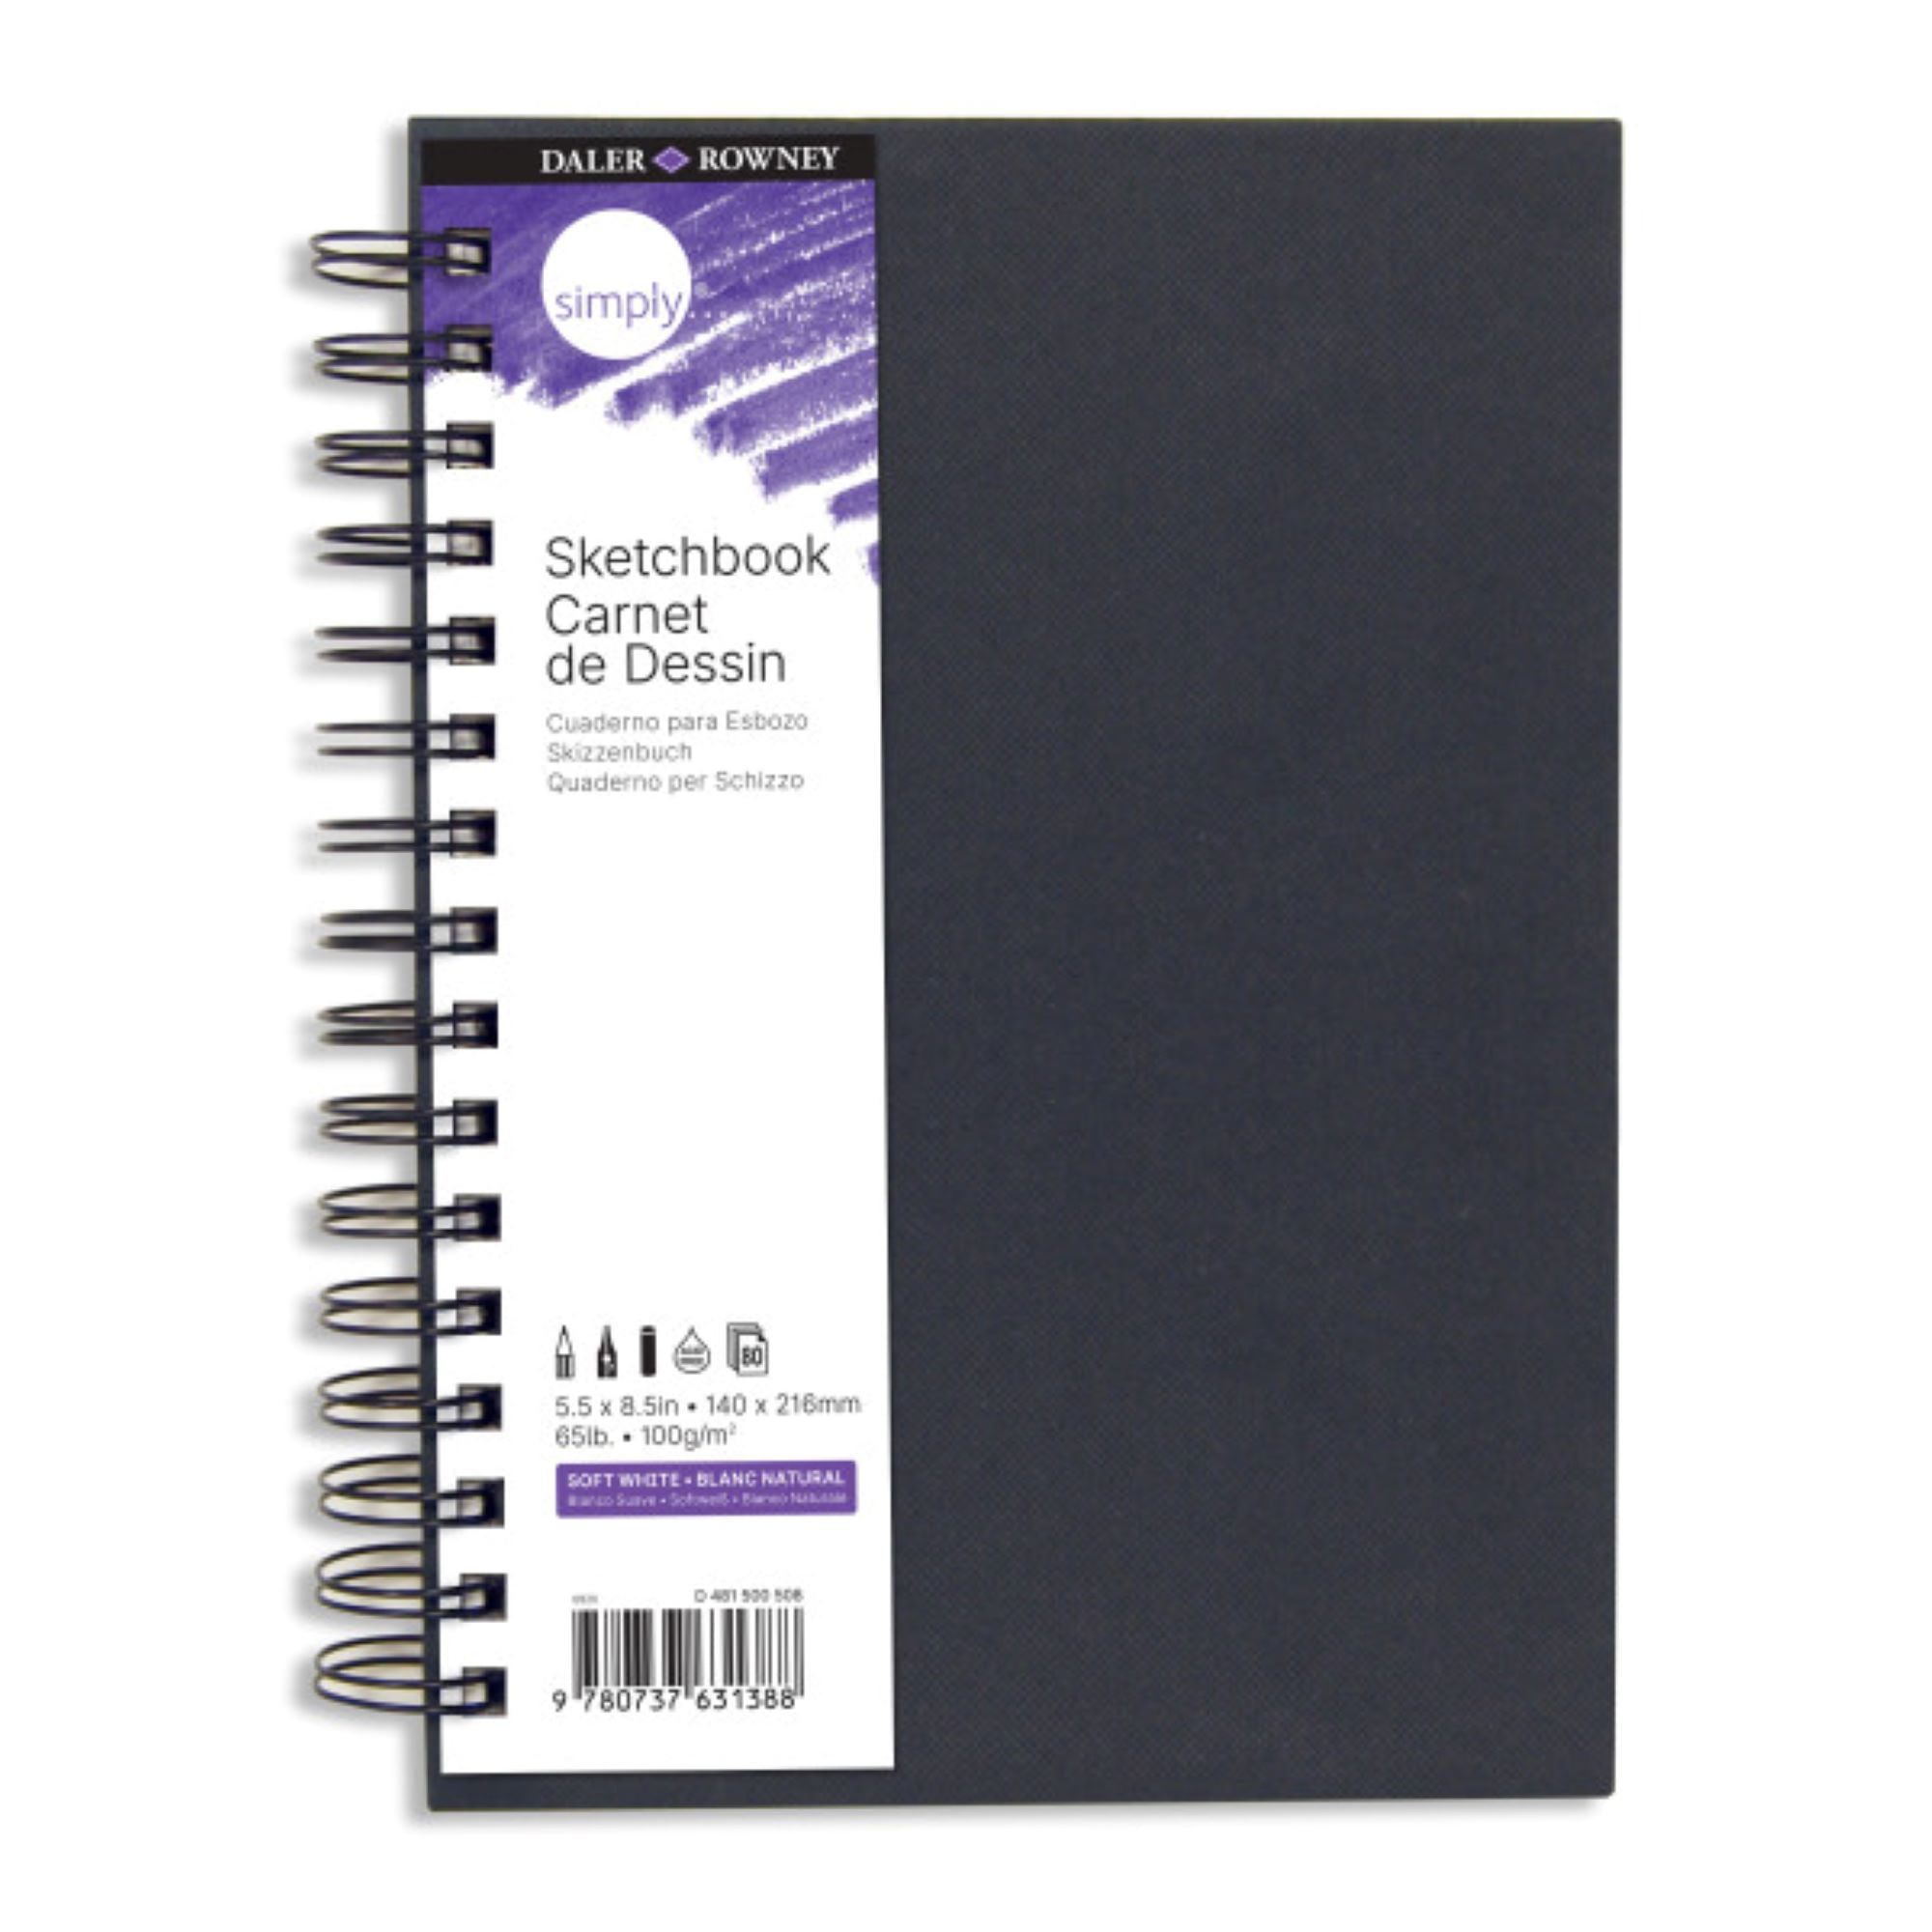 Two Pack Spiral Bound Sketchpad for Travel and Portable Sketch Work - -  Art-n-Fly